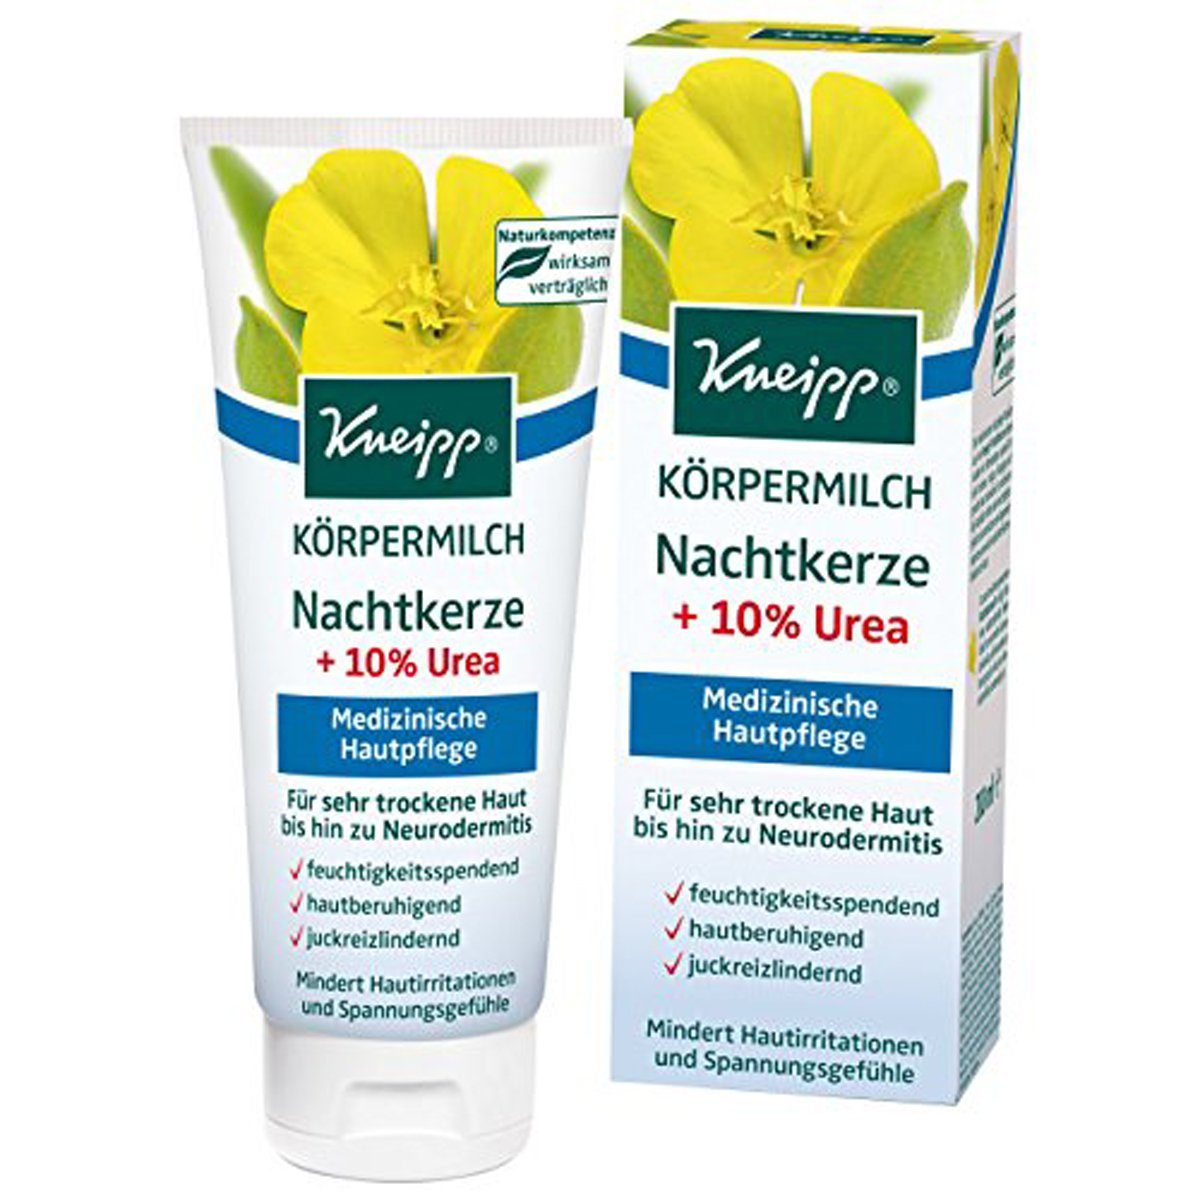 Kneipp Bademilch